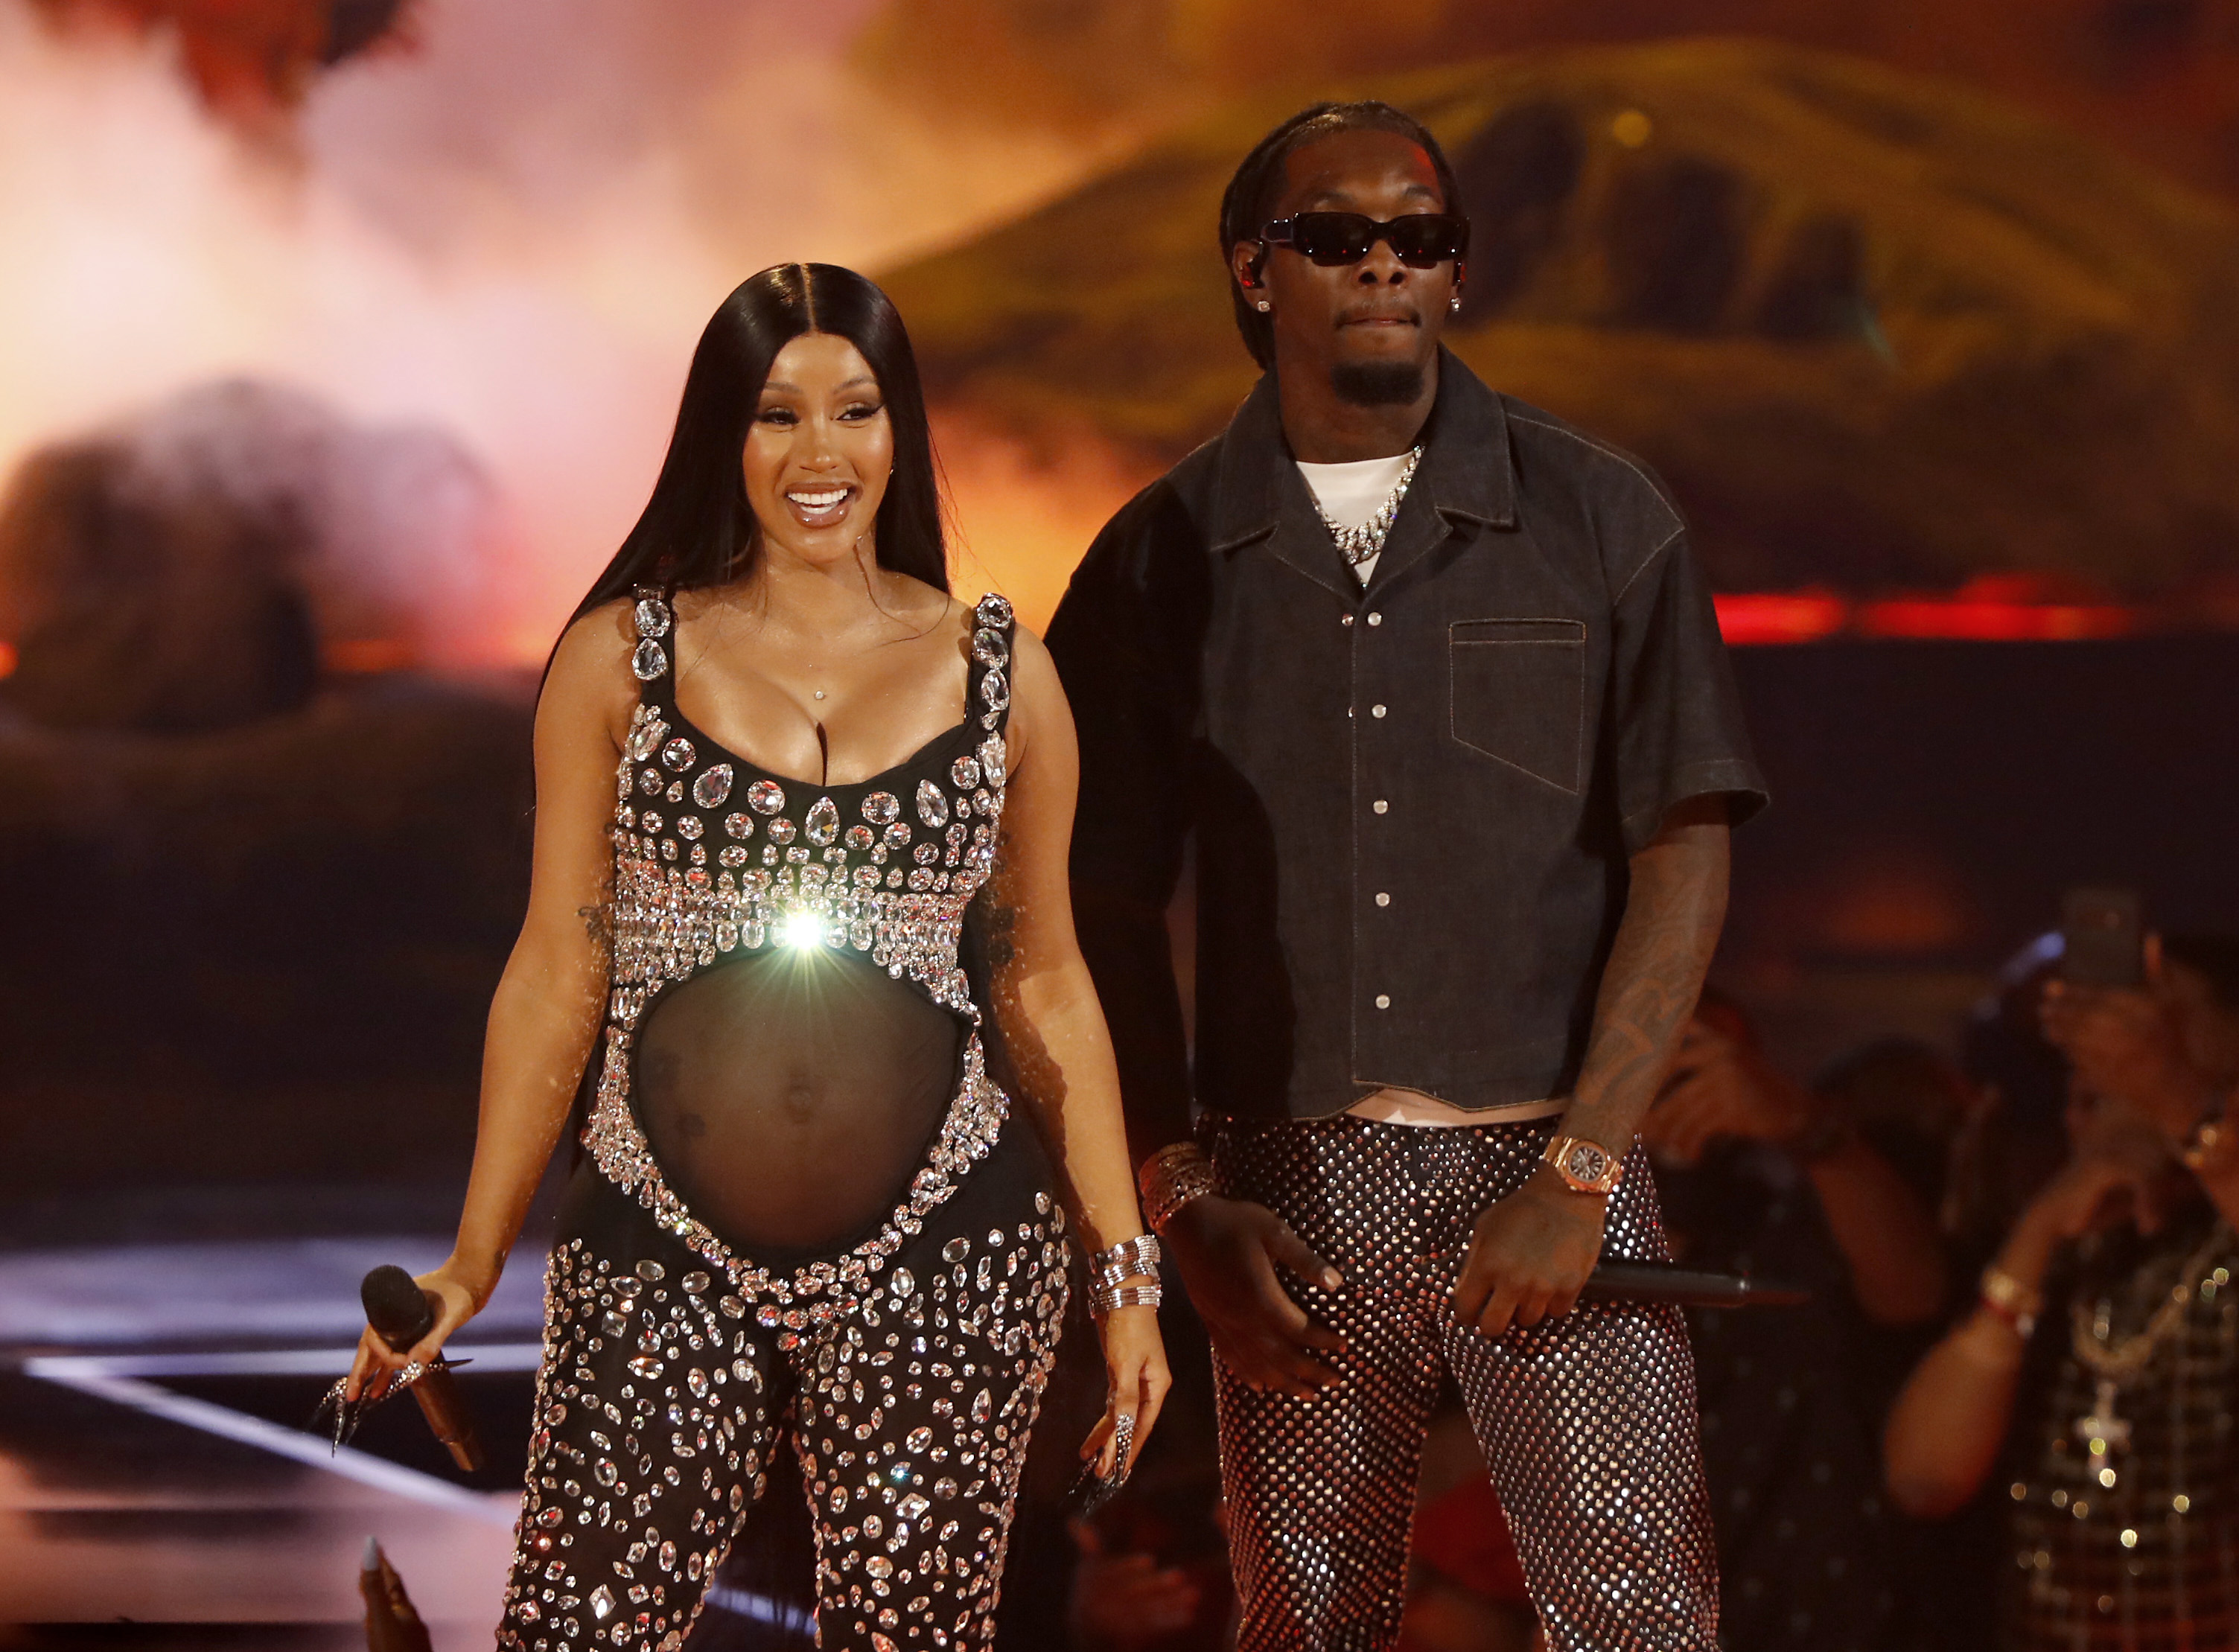 The rapper debuted her baby bump during her second pregnancy at the 2021 BET Awards